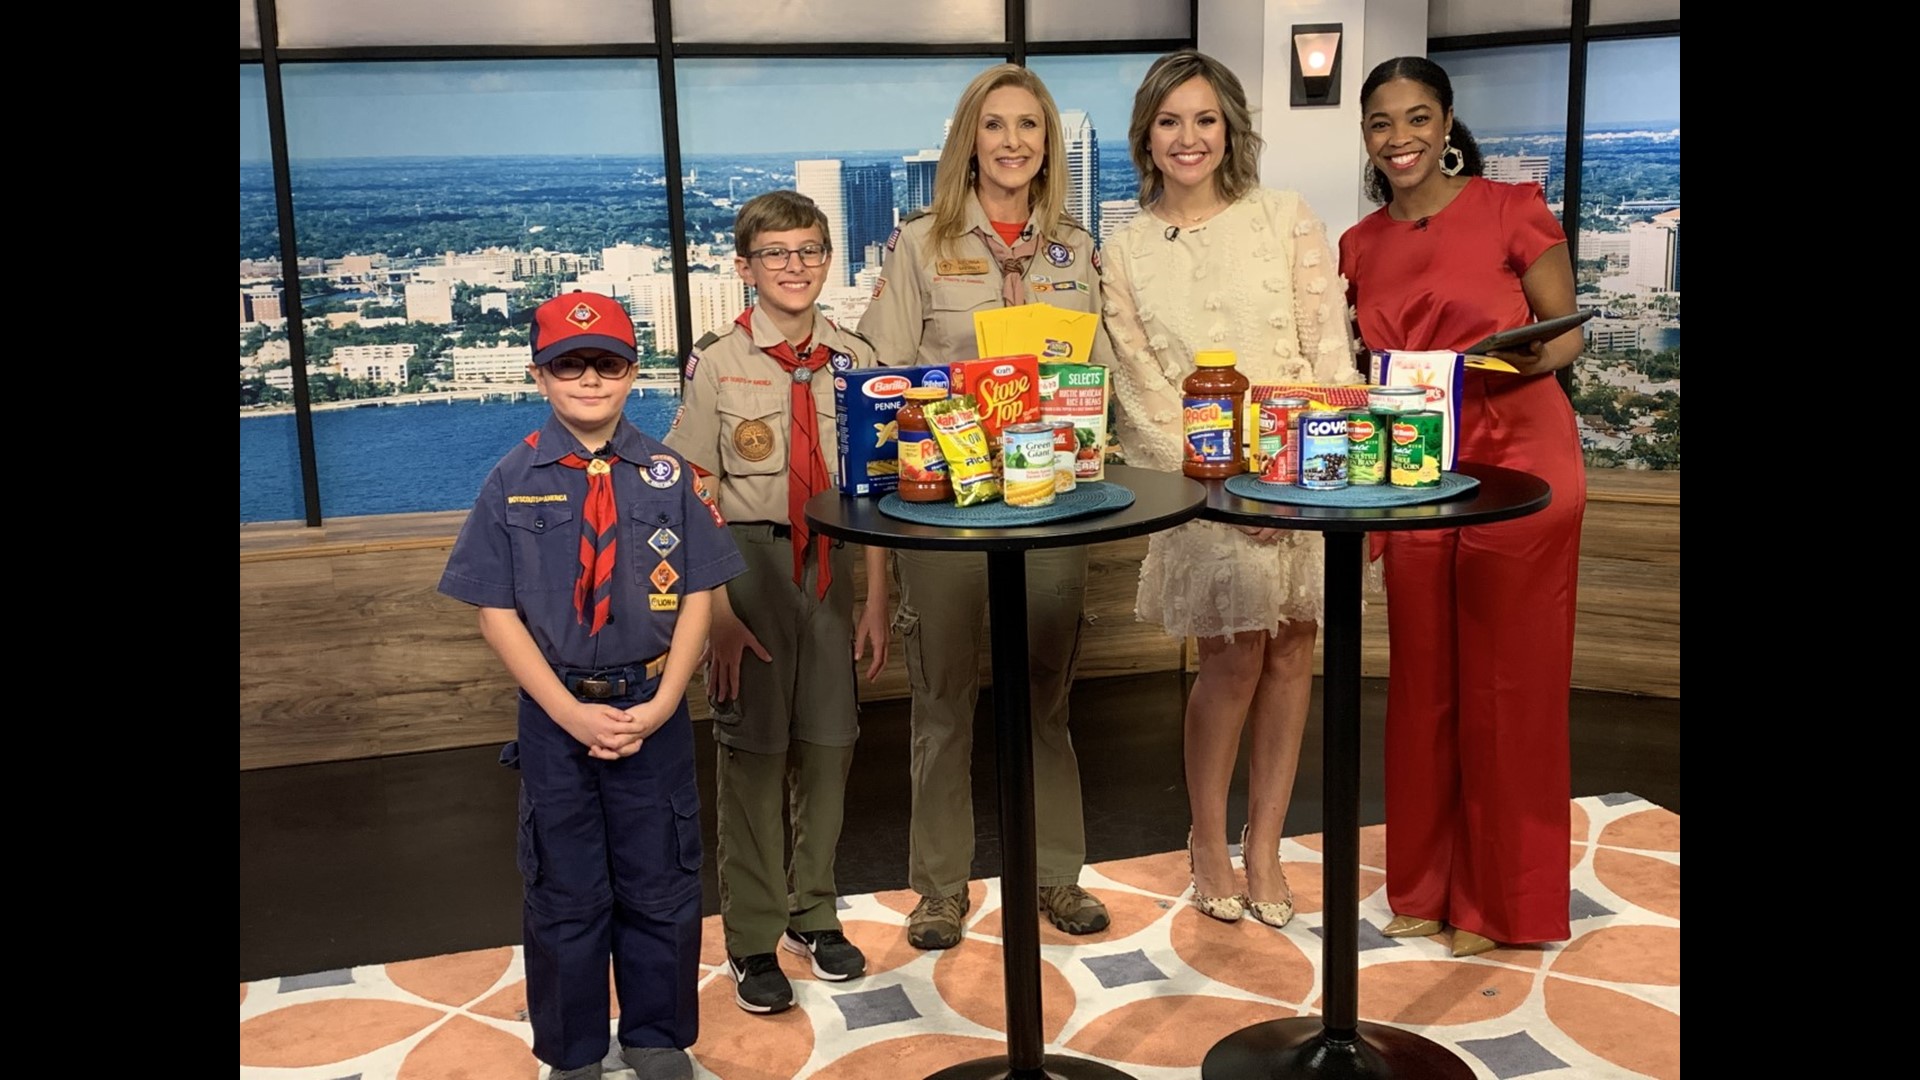 Scouting for Food is an annual food-collection drive, and one of the many service projects the BSA has conducted since 1910.